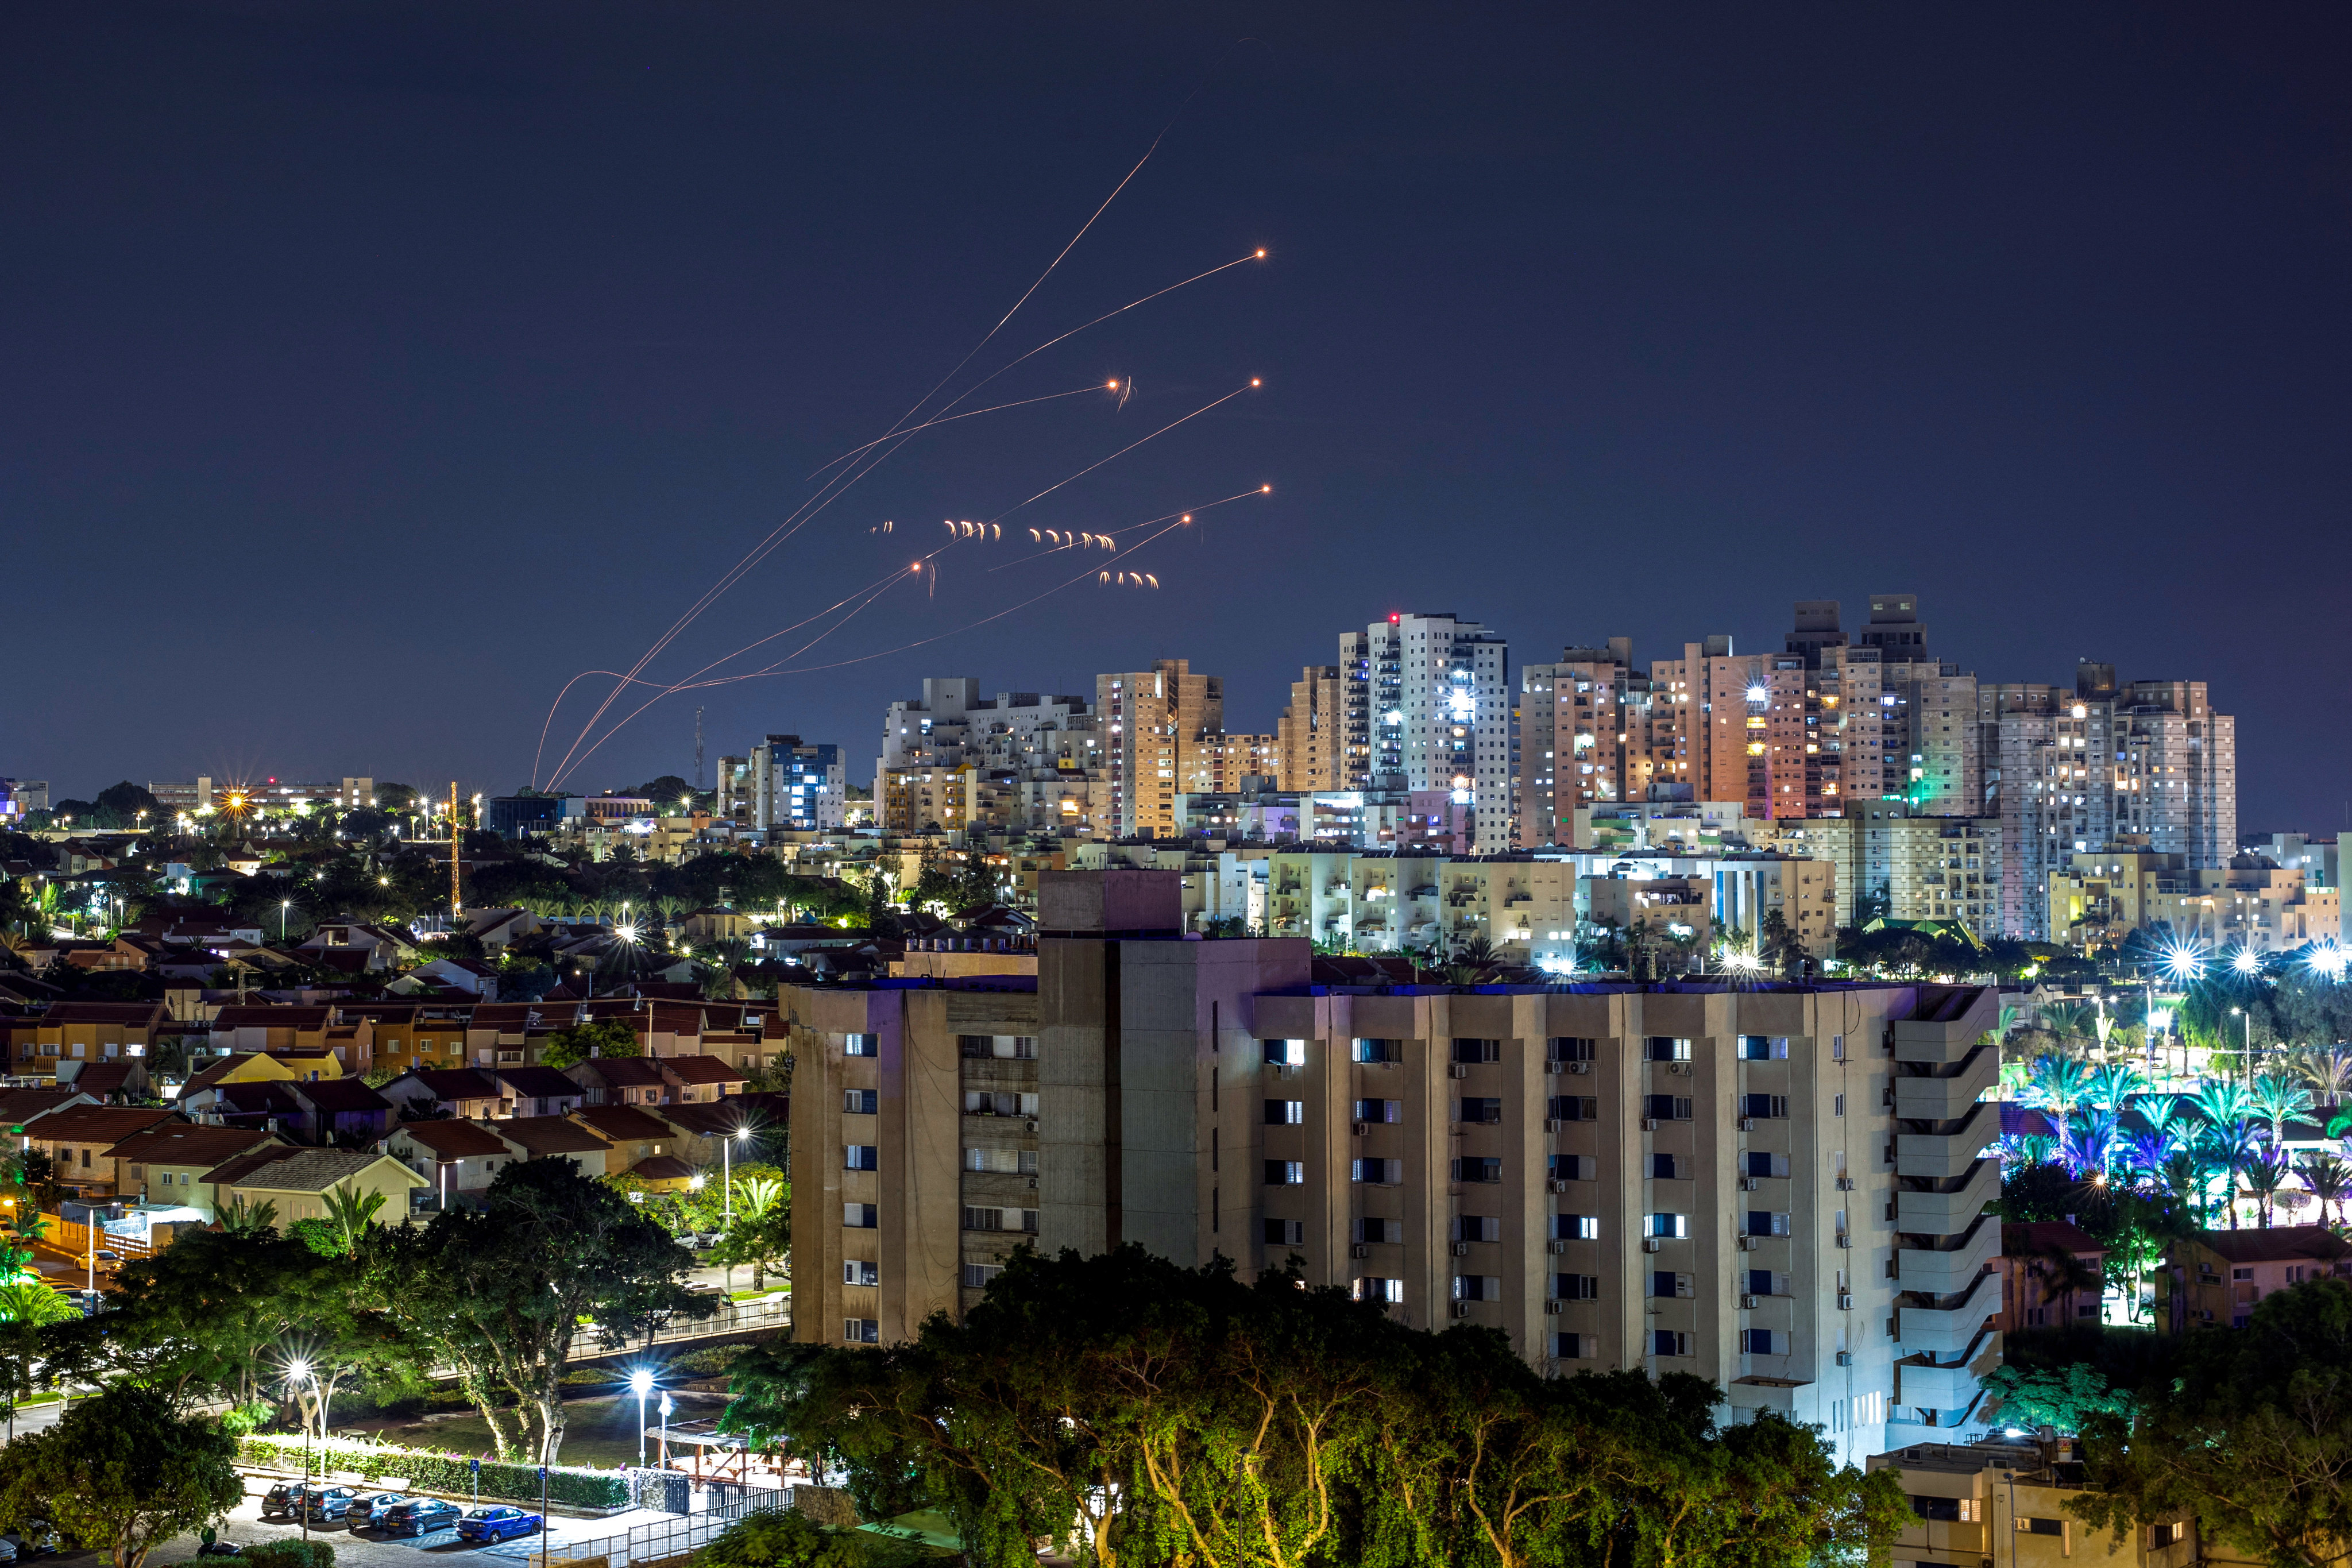 Israeli anti-missile systems intercept rockets launched from the Gaza Strip, as seen from Ashkelon in southern Israel on Saturday. Photo: Reuters